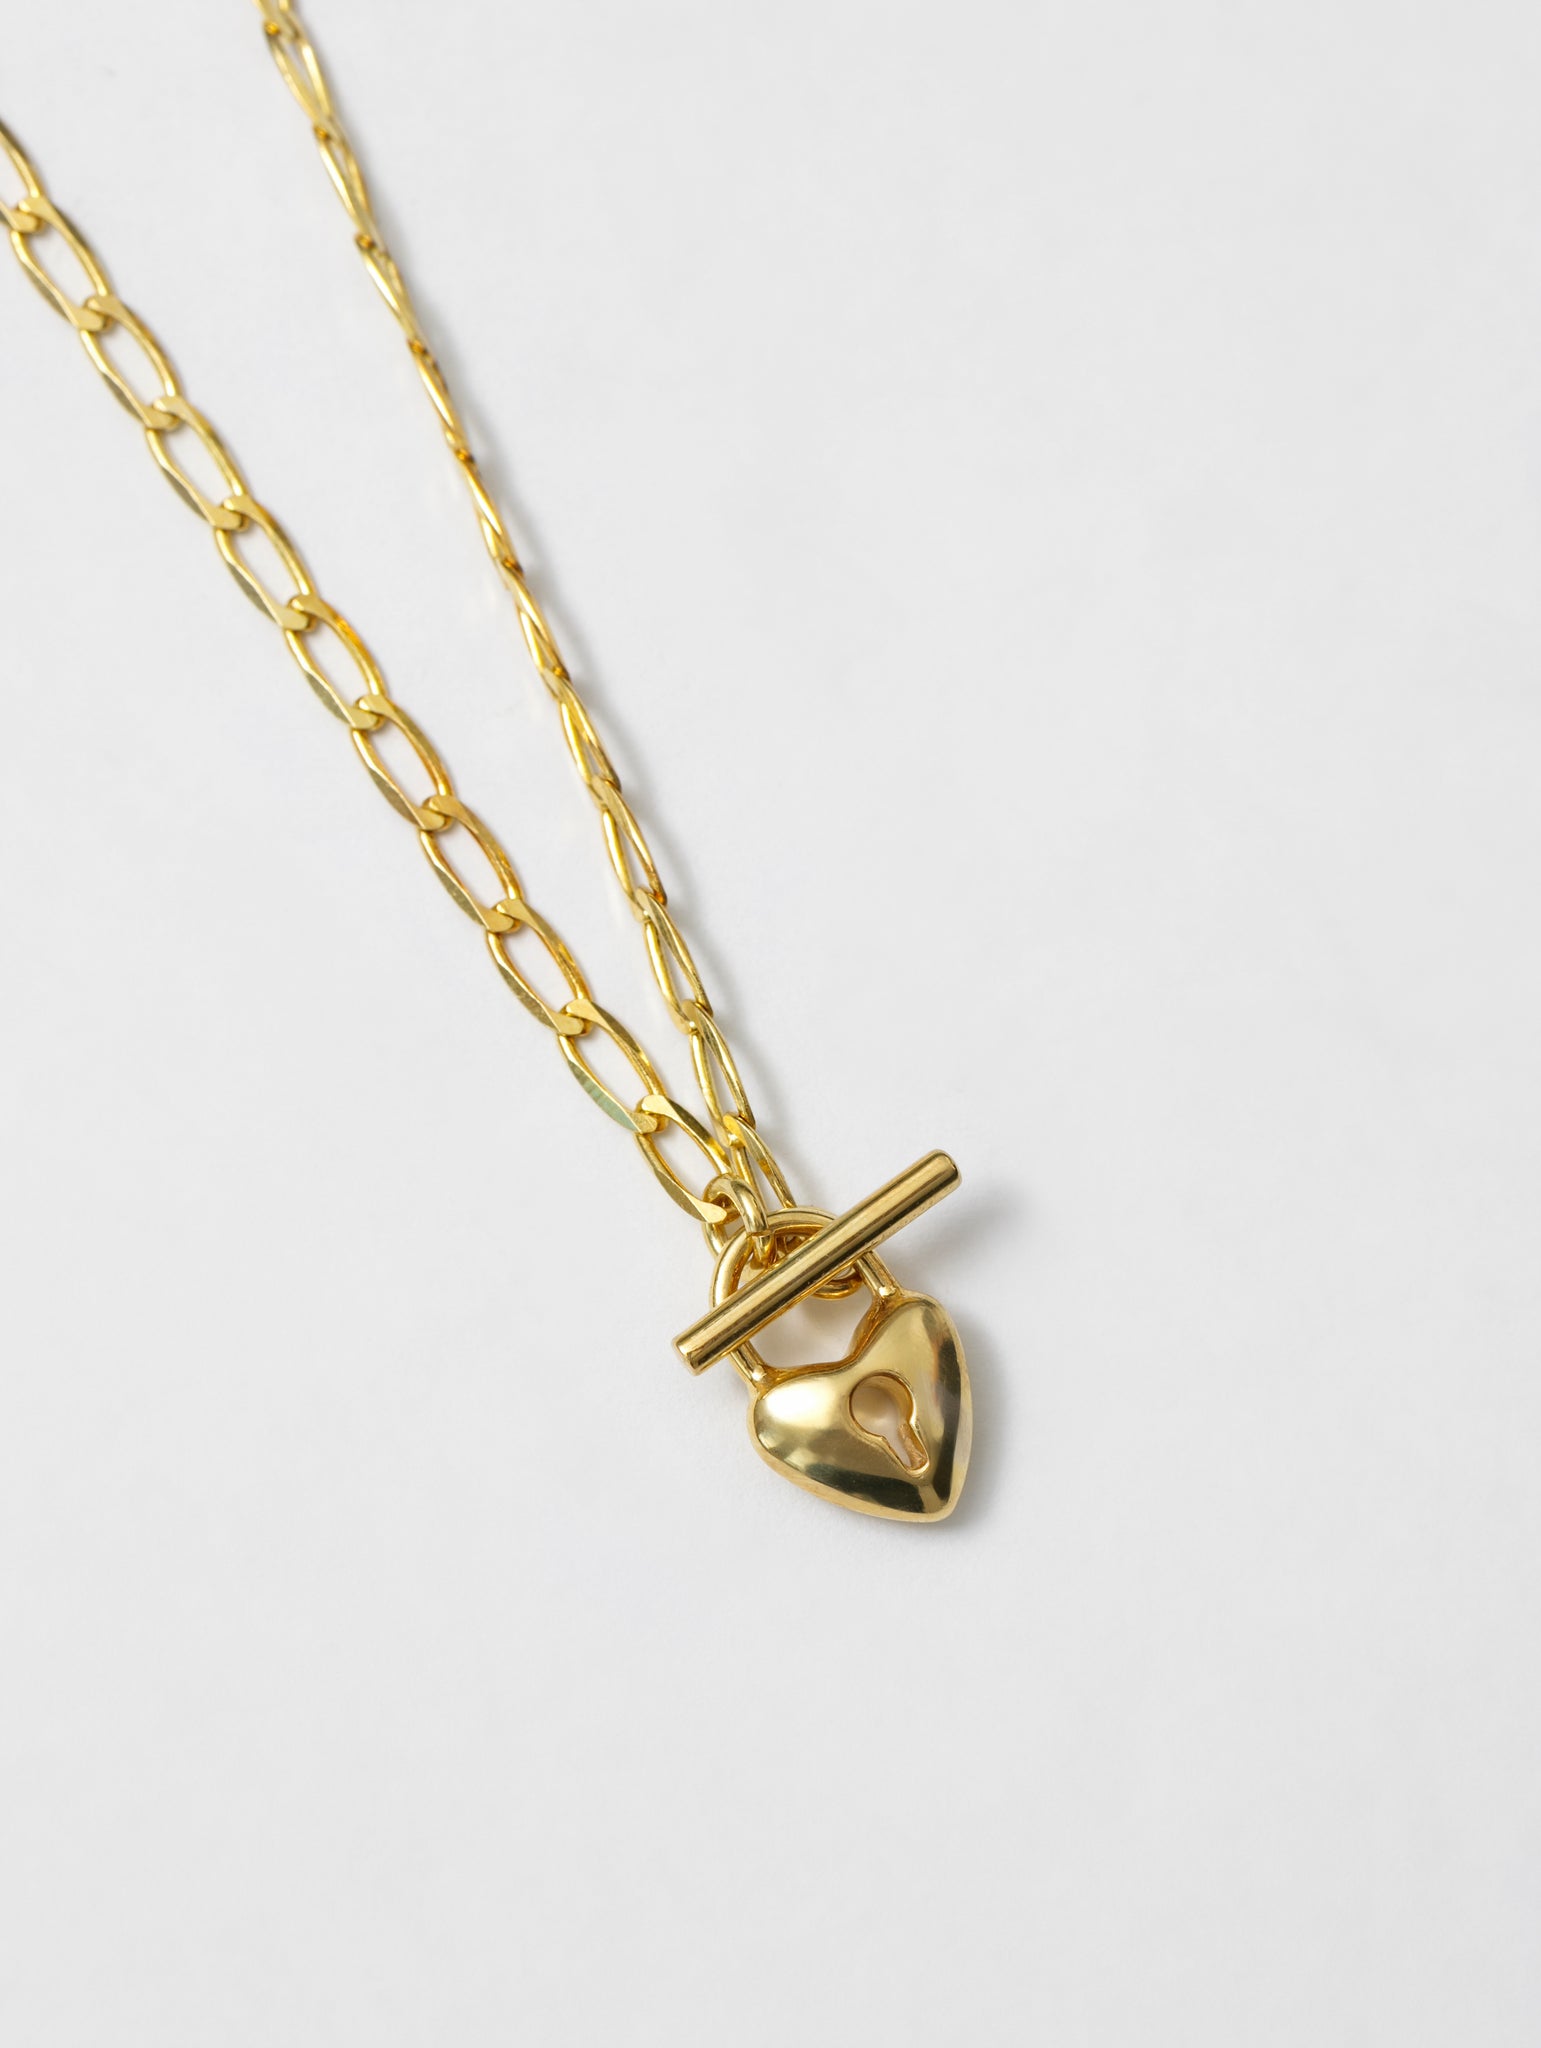 Wolf Circus Heart Locket Toggle Clasp Curb Chain Necklace in 14k Gold Plated-Necklaces-17.5"-wolfcircus.com